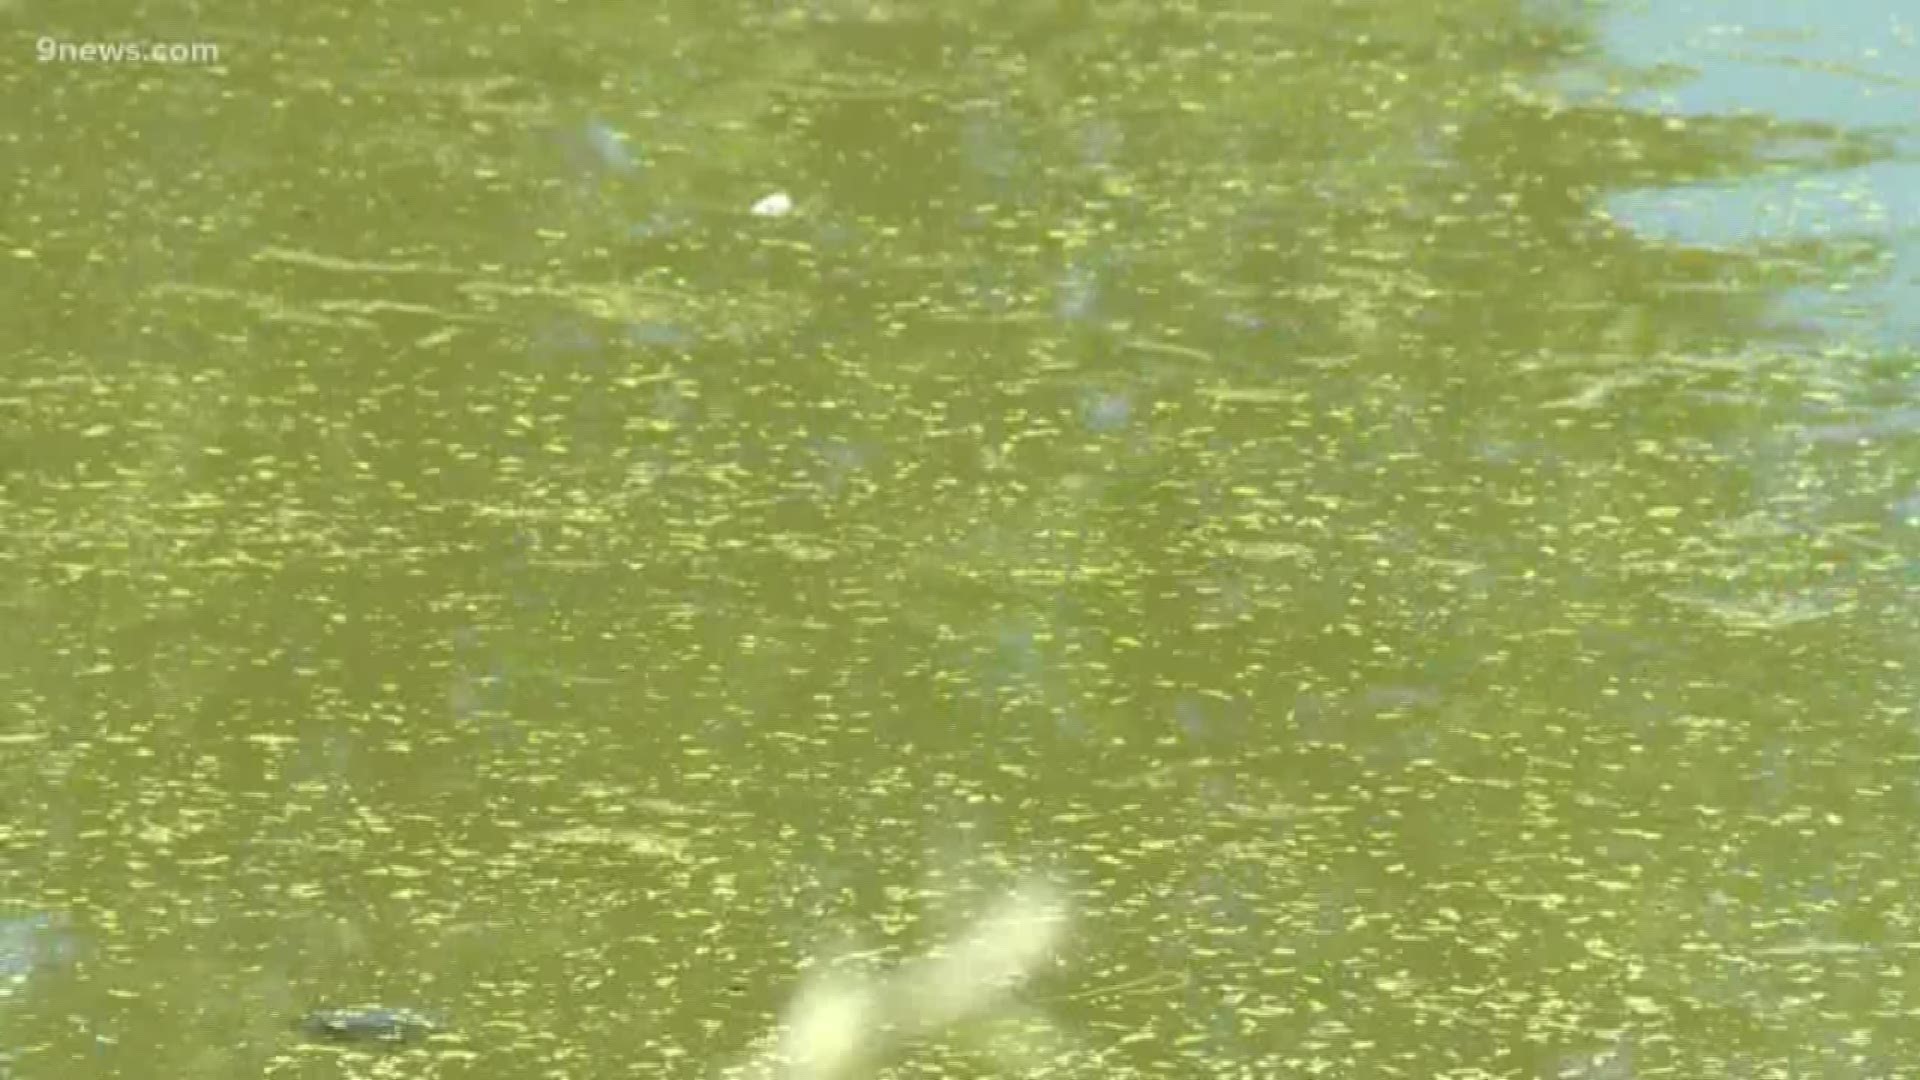 The hot weather caused algae blooms in two lakes at the same time, which the city says is very unusual.